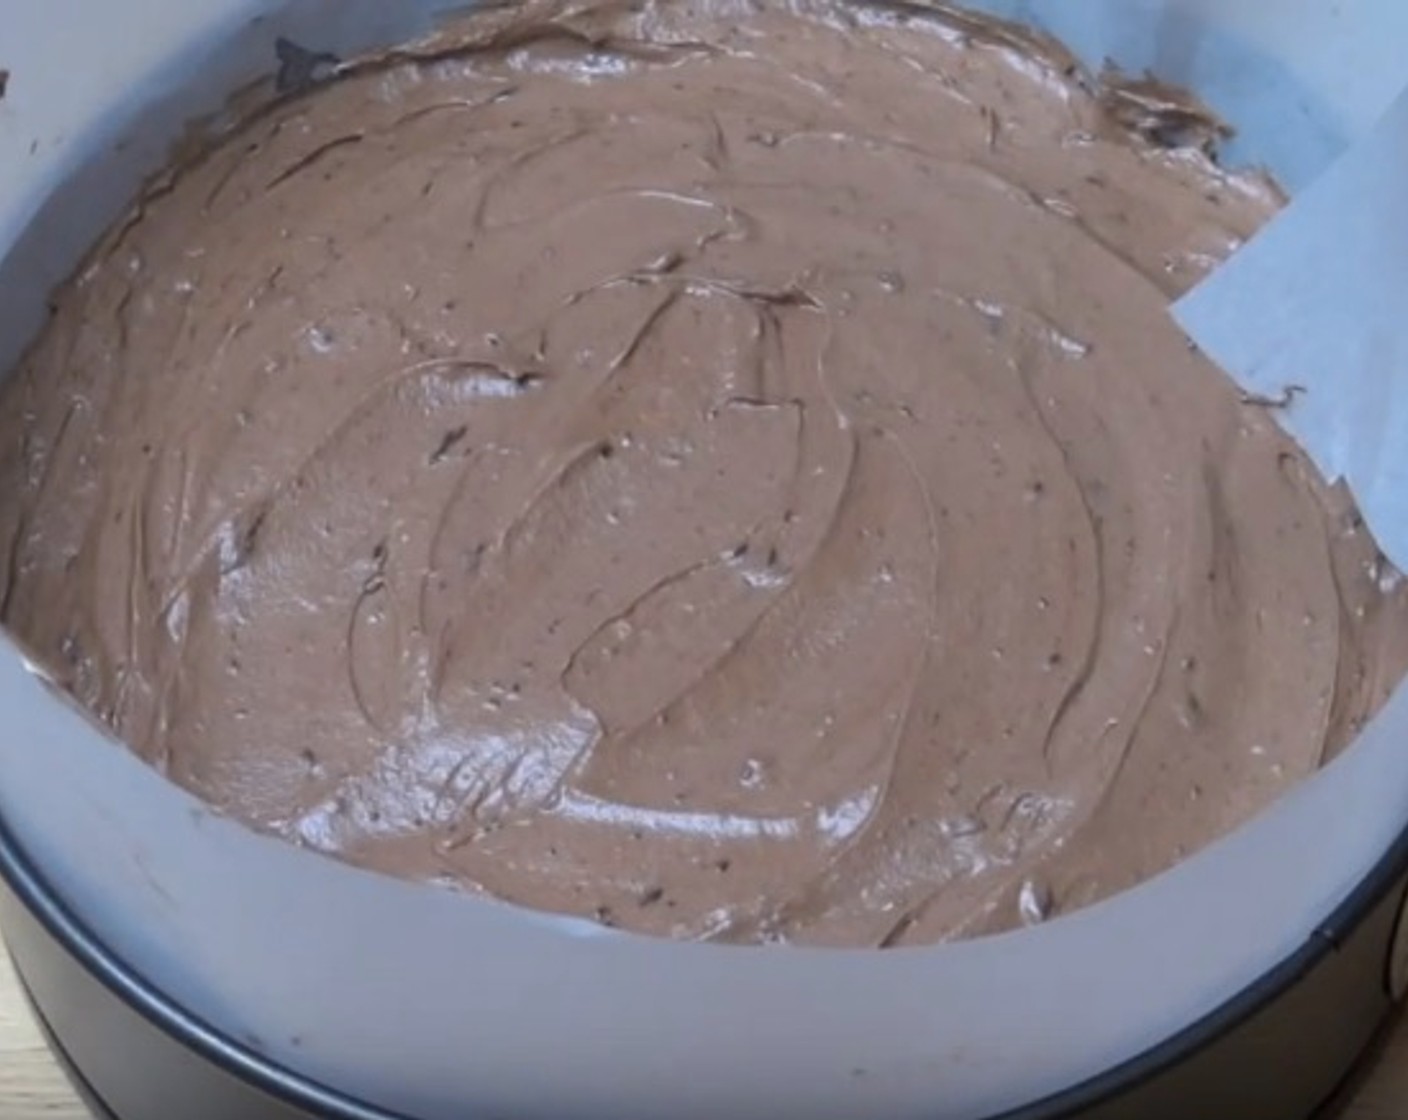 step 7 Transfer the mousse into the cake tin. Smooth the surface with a spatula. Place in fridge to chill for 3-4 hours, or until set.